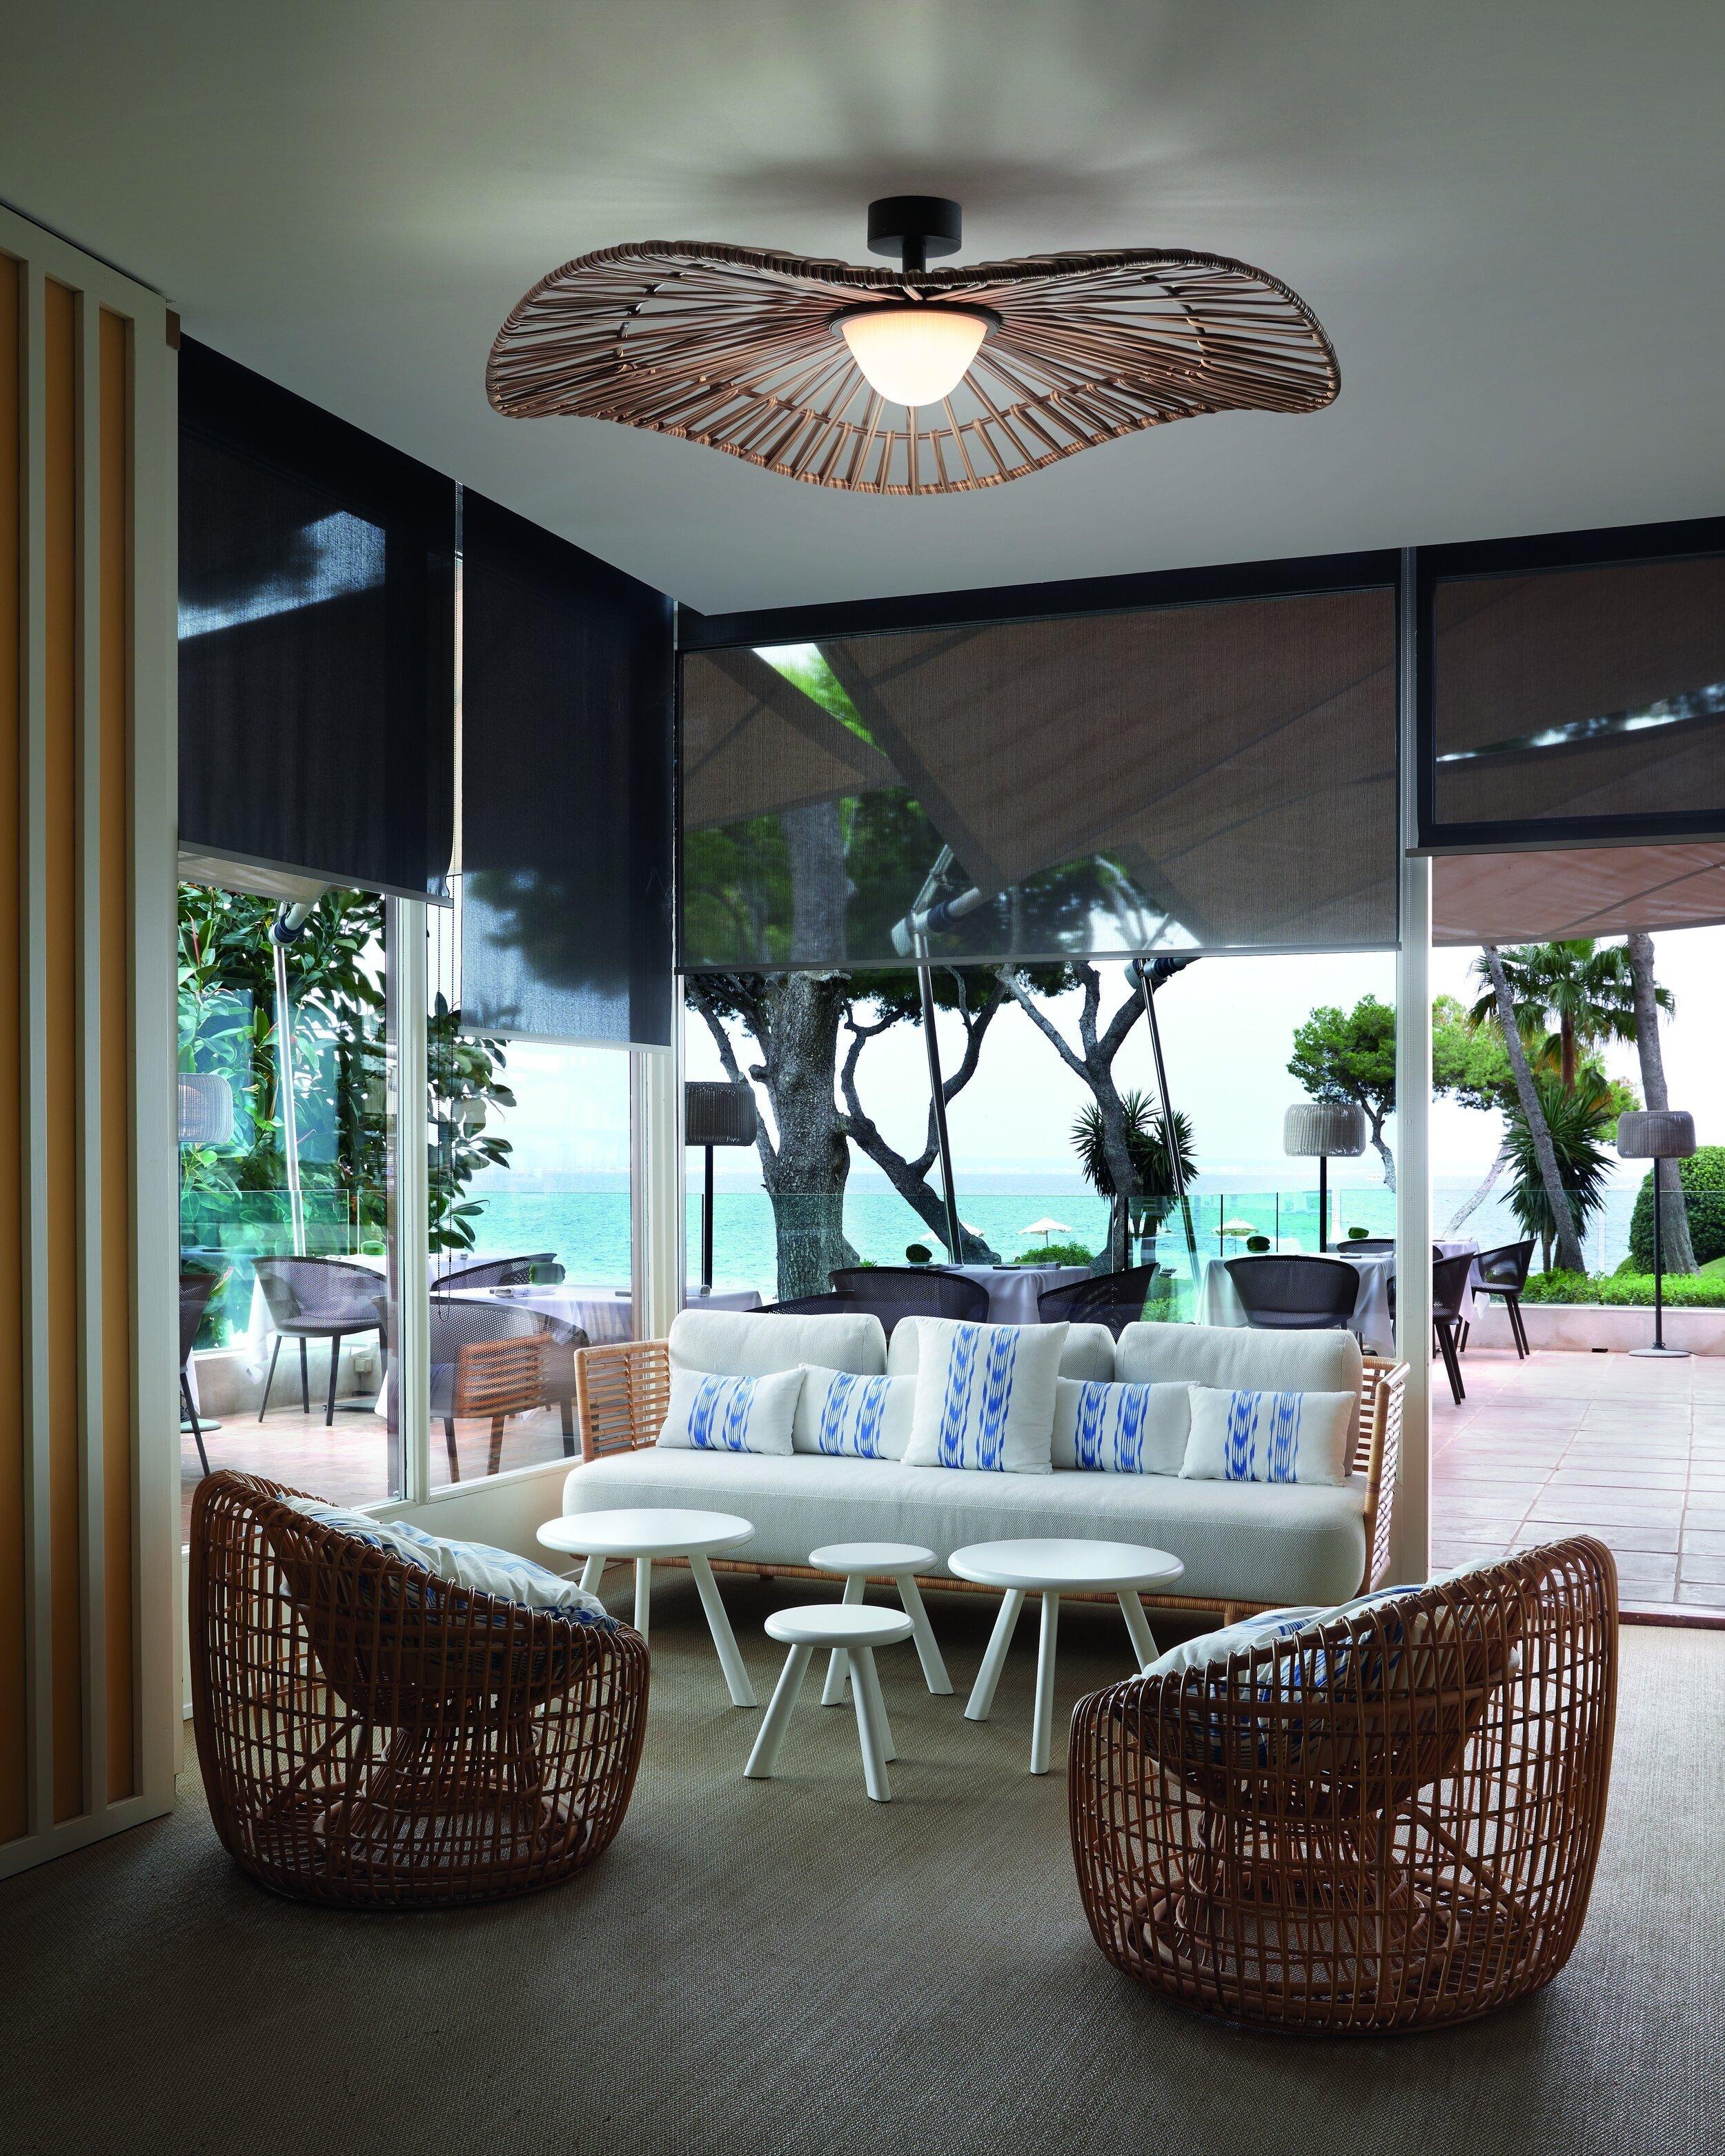 Mediterranea ceiling light outdoor contemporary coastal ceiling fixture Bover handmade on Nook Collections over a lounge area